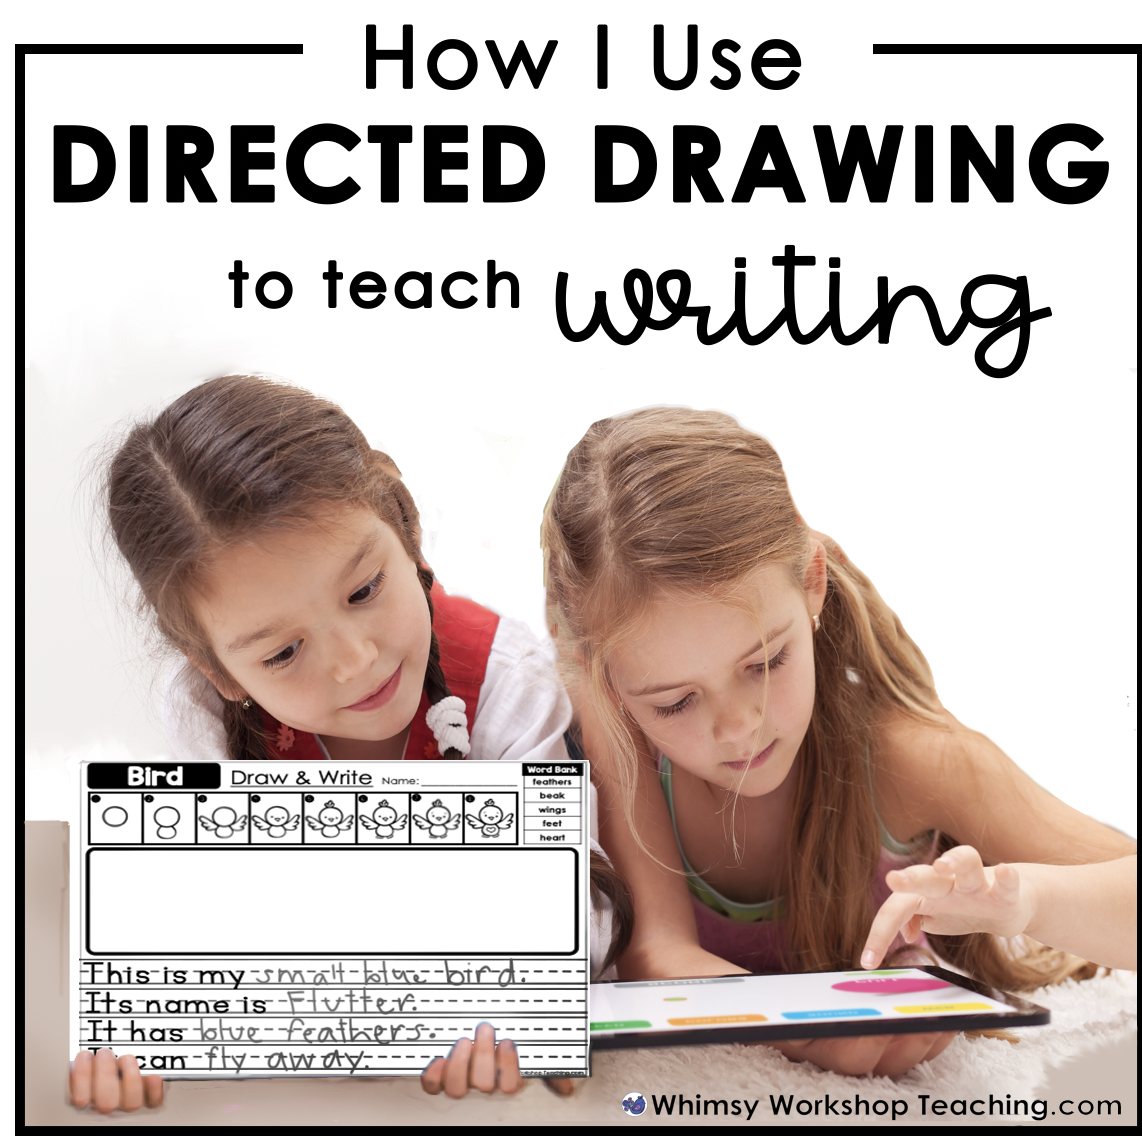 literacy-wriiting-directed-drawing-projects-kids-easy-activities